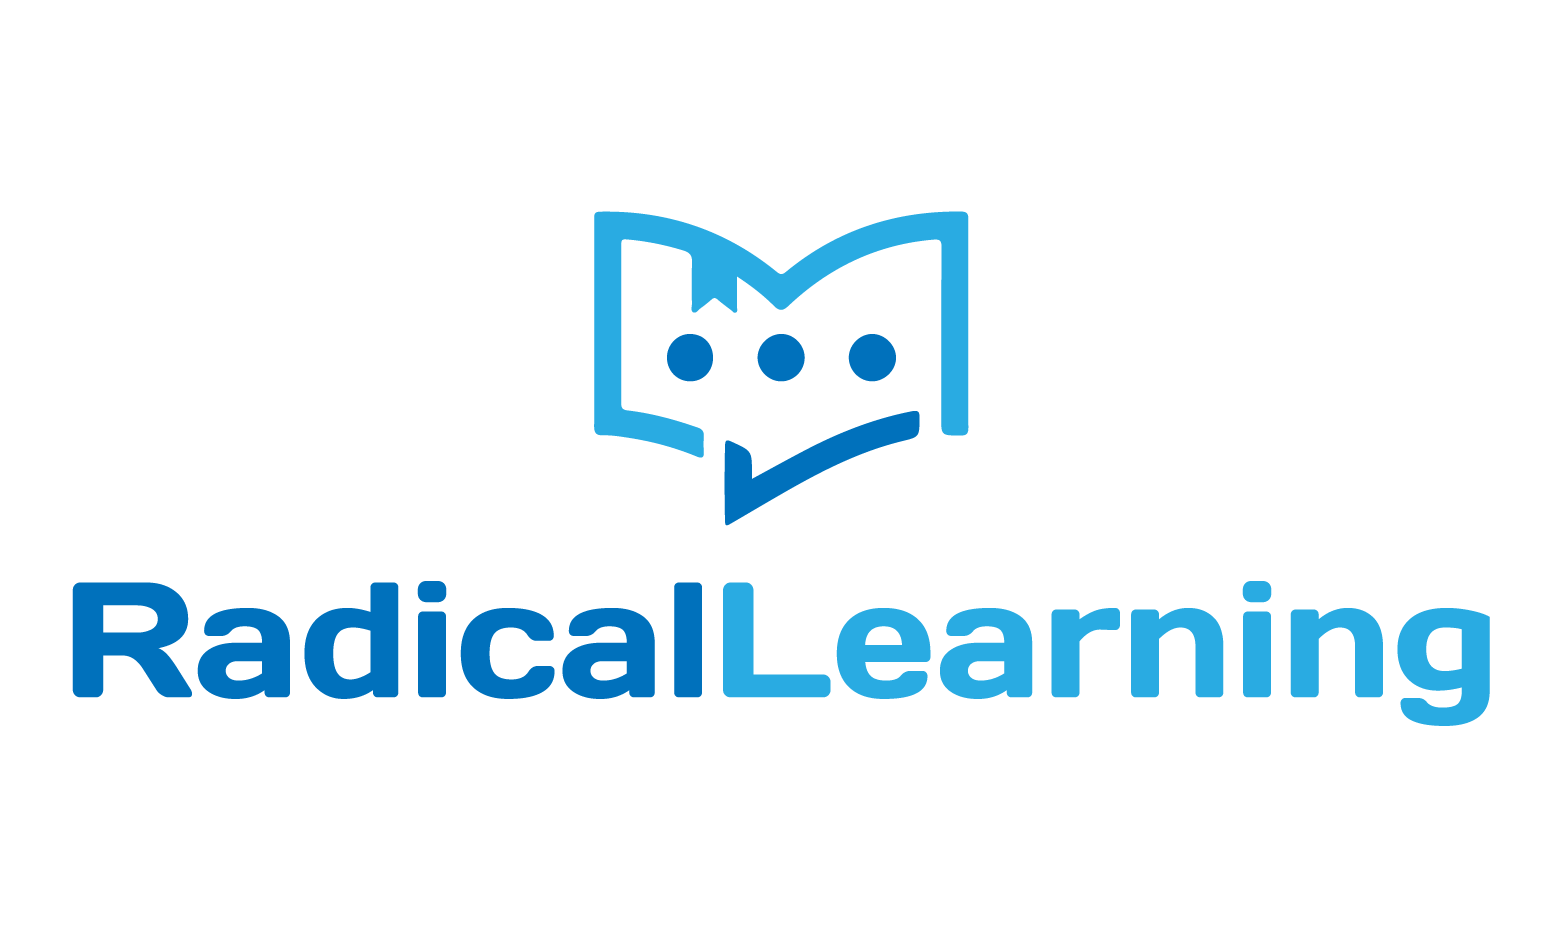 RadicalLearning.com - Creative brandable domain for sale